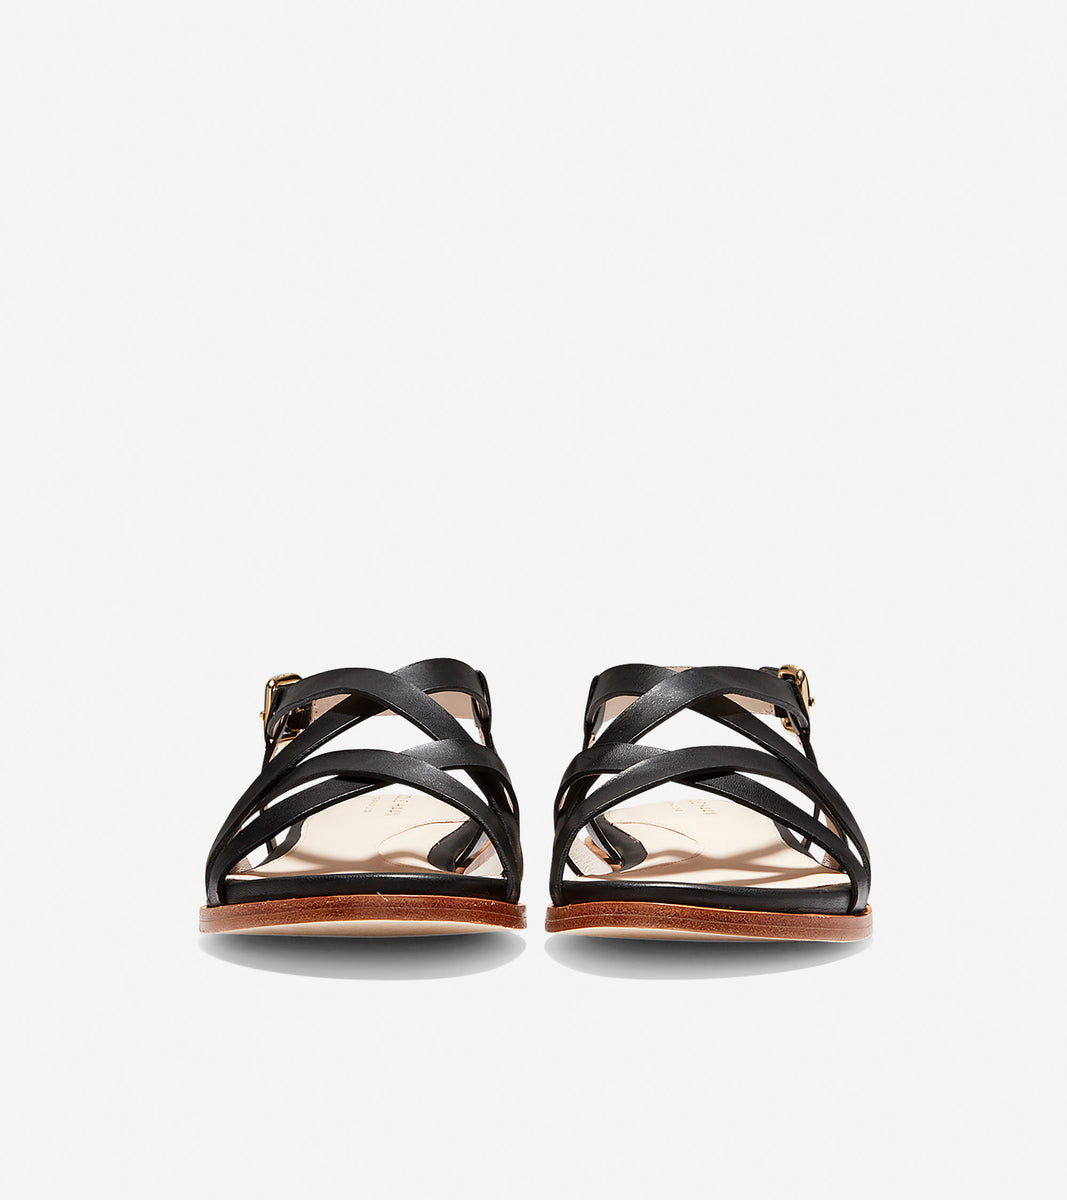 ColeHaan-Analeigh Grand Strappy Sandal-w14372-Black Leather